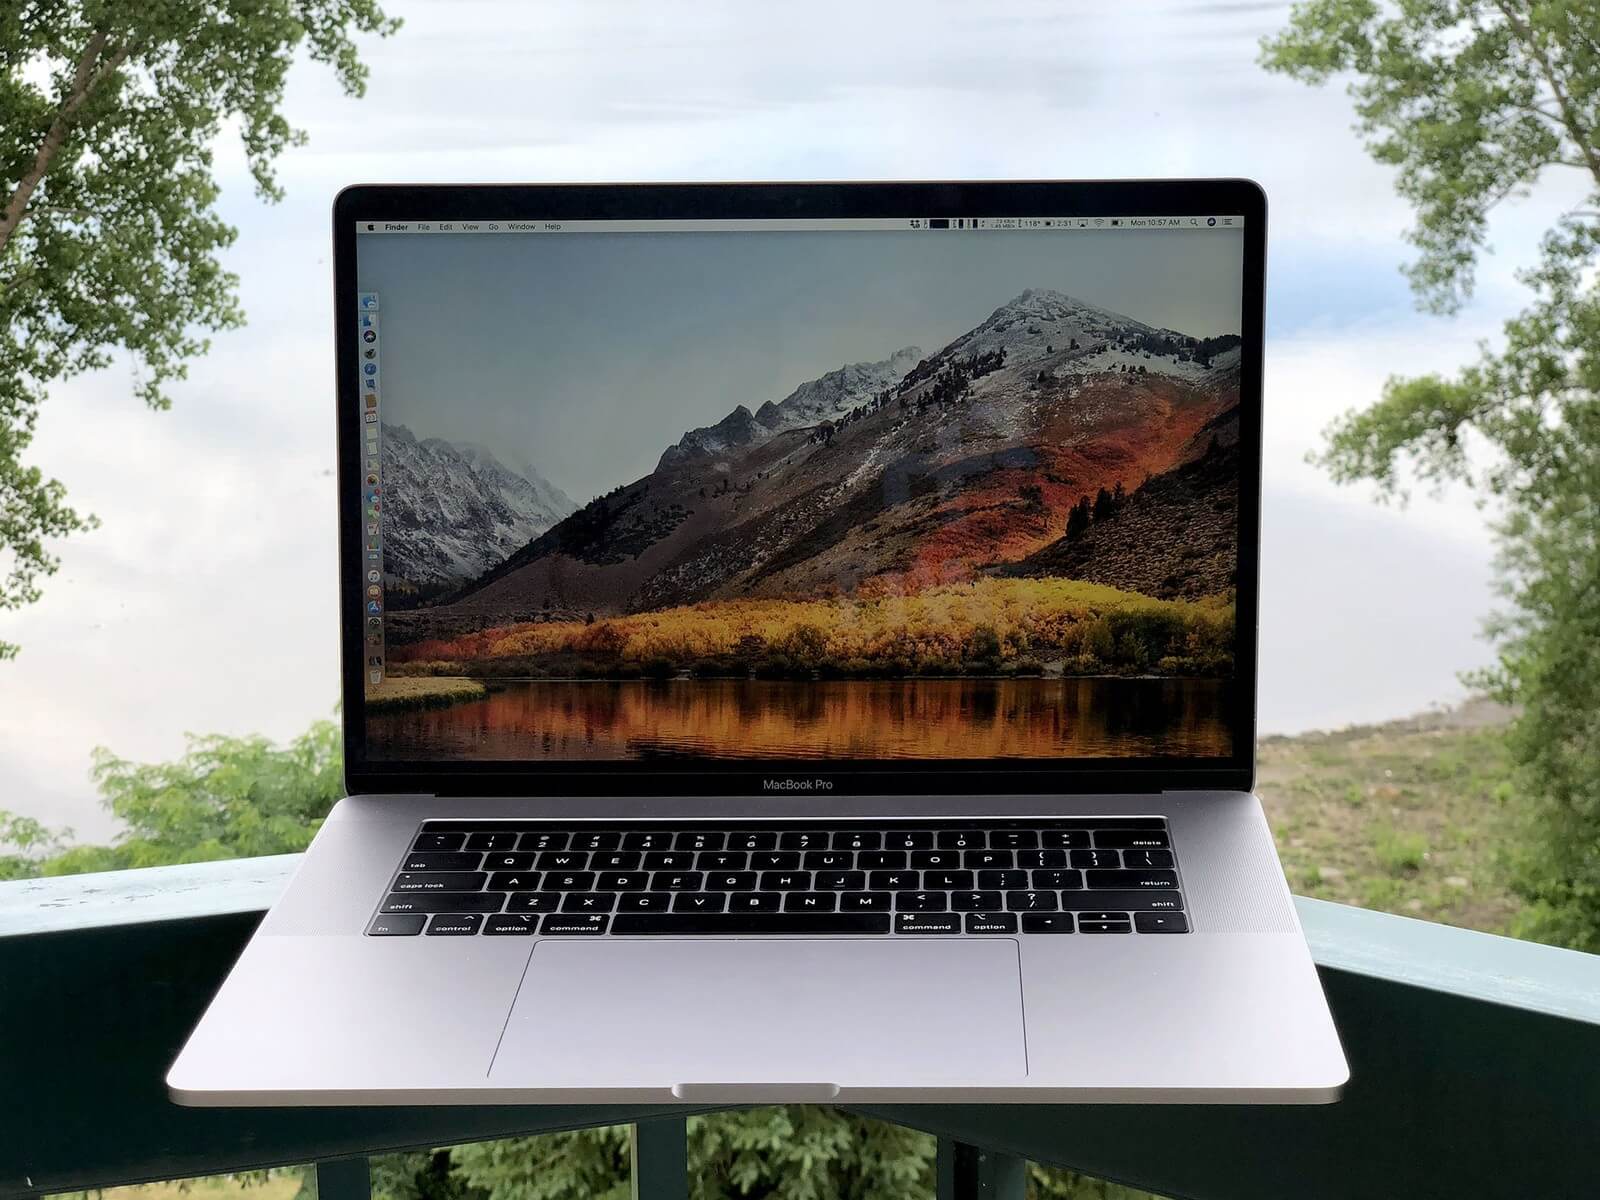 apple macbook pro 13 inch introduction